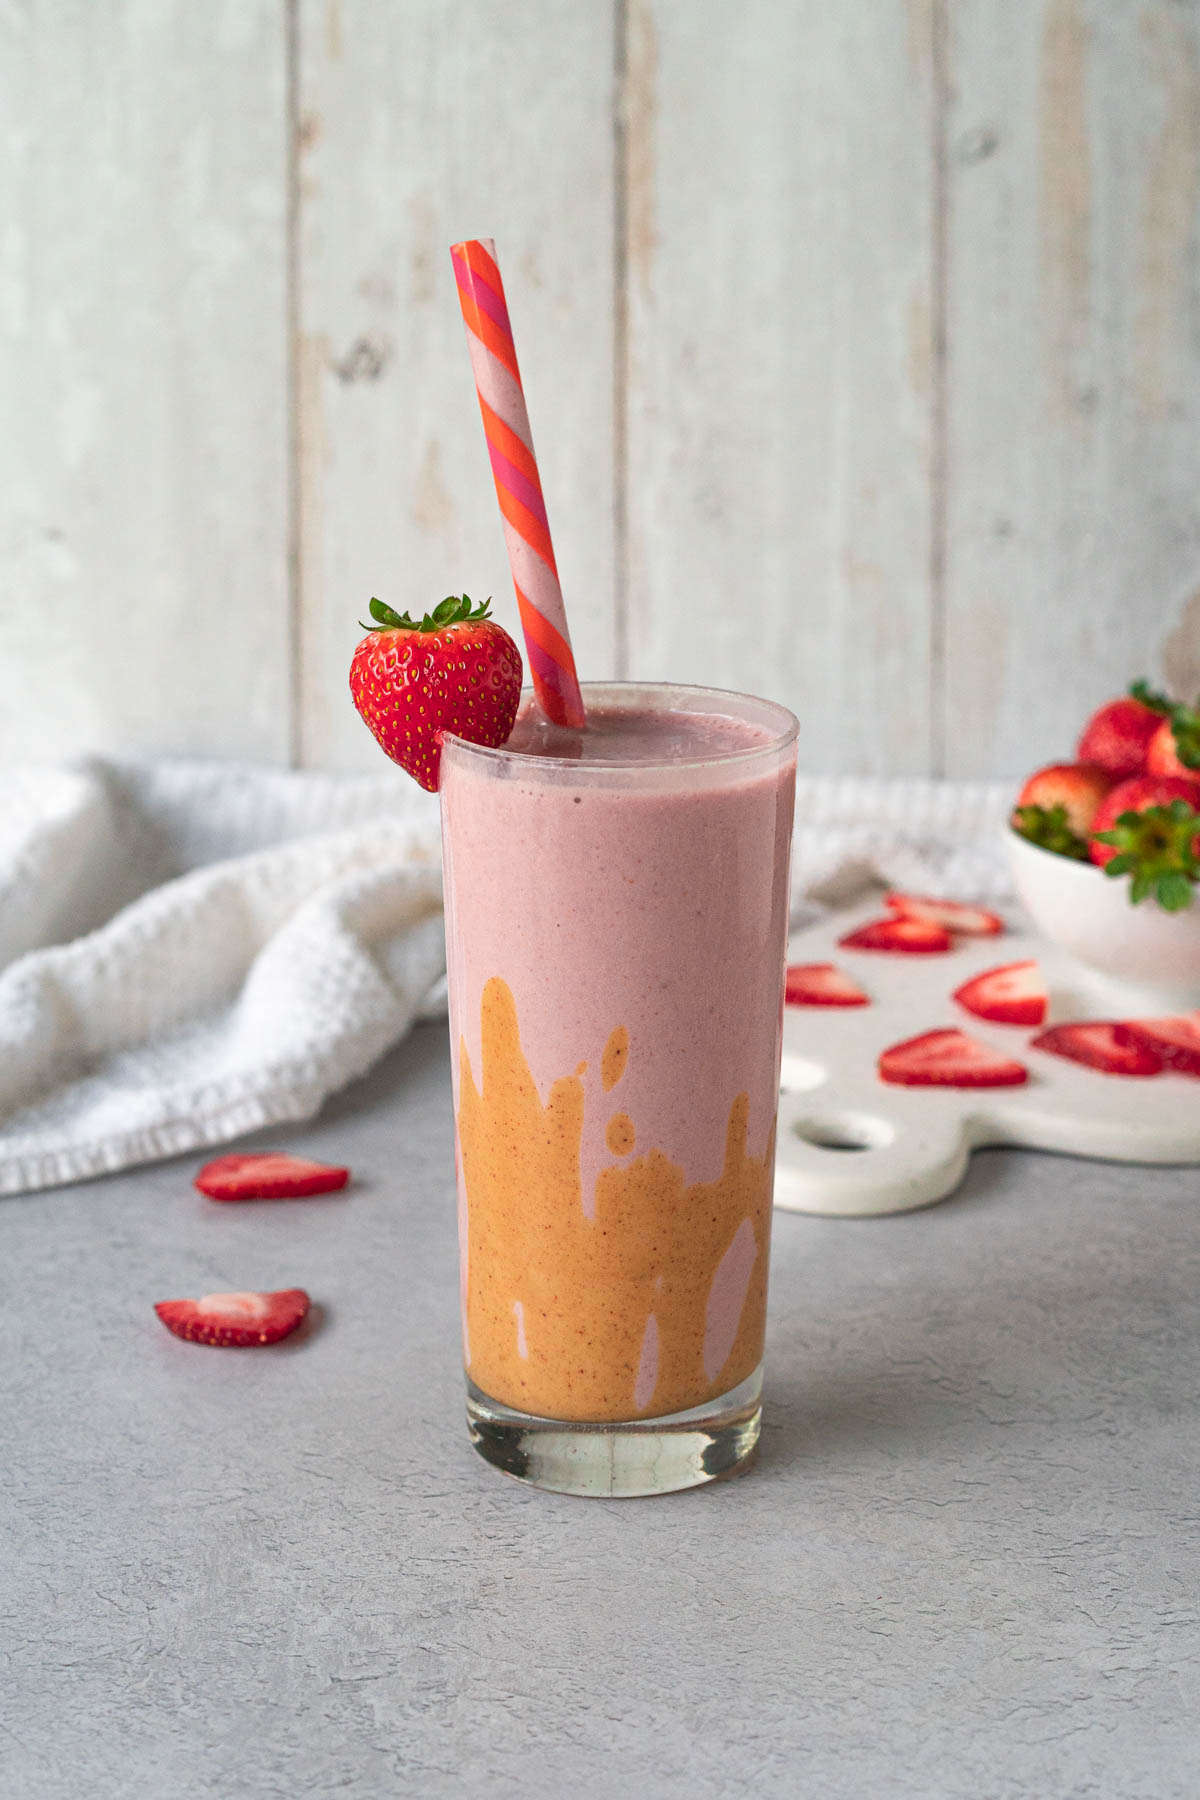 glass filled with strawberry smoothie garnished with peanut butter drizzle, fresh strawberry, and a pink and orange striped straw